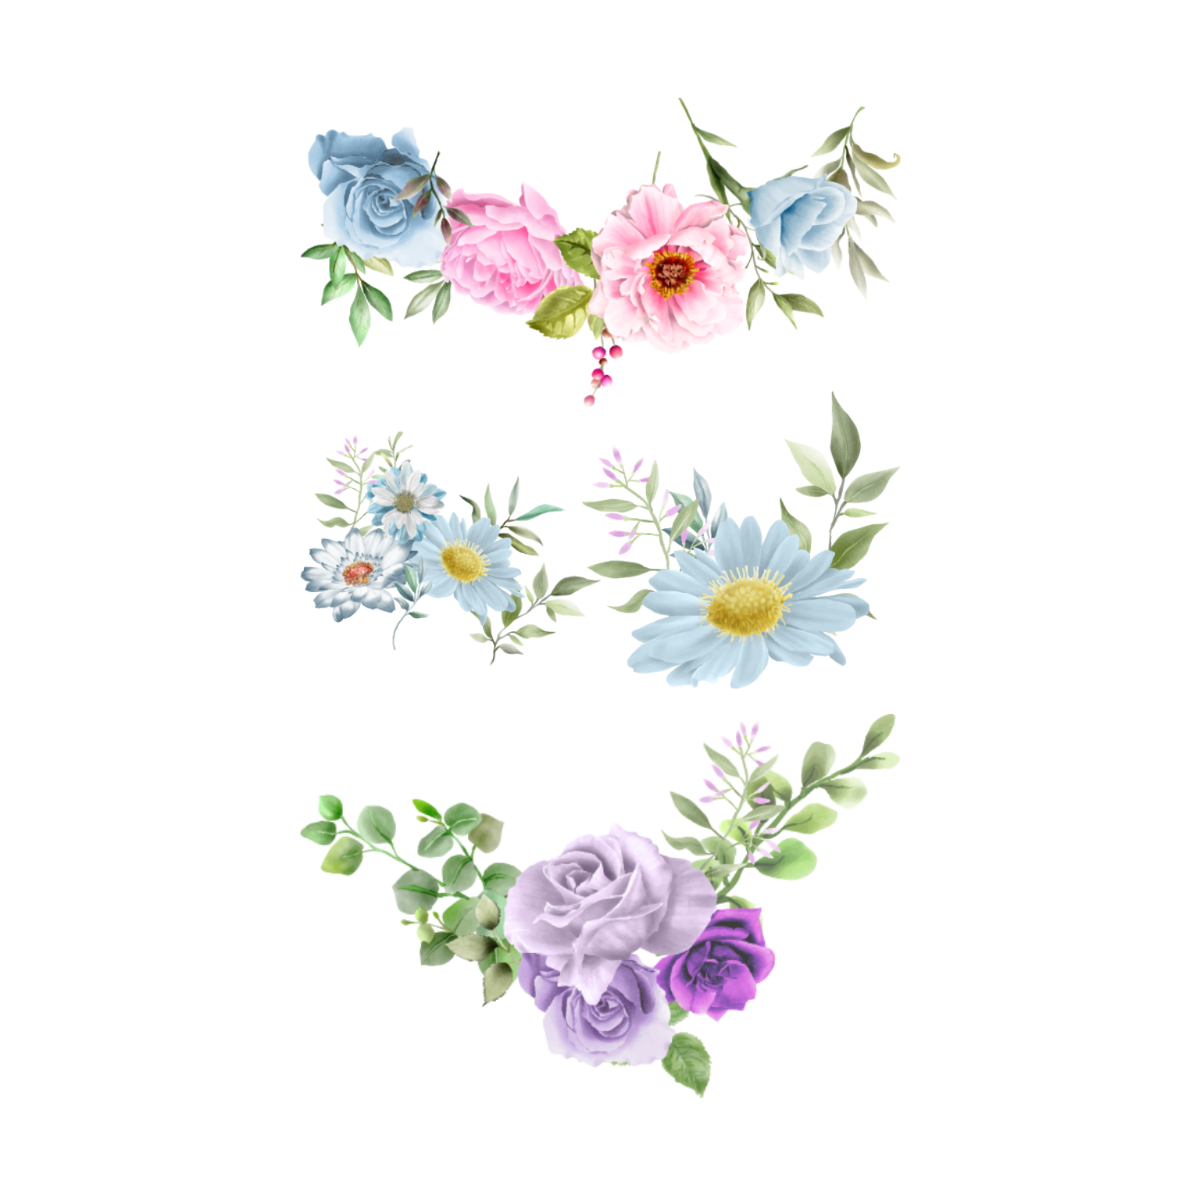 Botanical Watercolor Illustrations Template